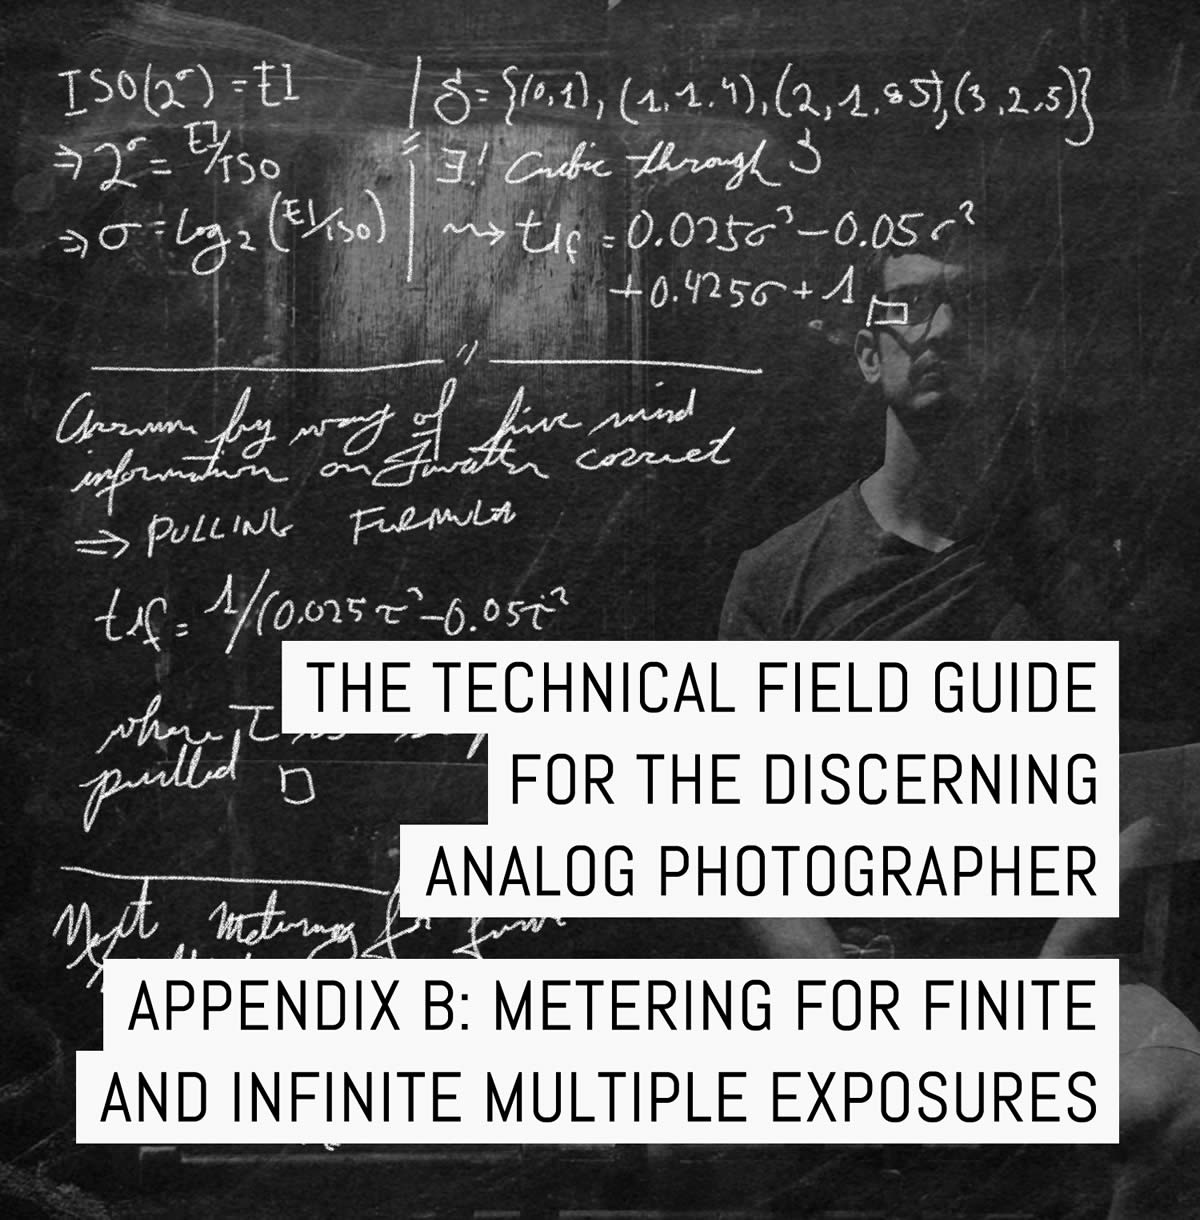 Appendix B of the Technical Field Guide for the Discerning Analog Photographer: Metering for finite and infinite multiple exposures